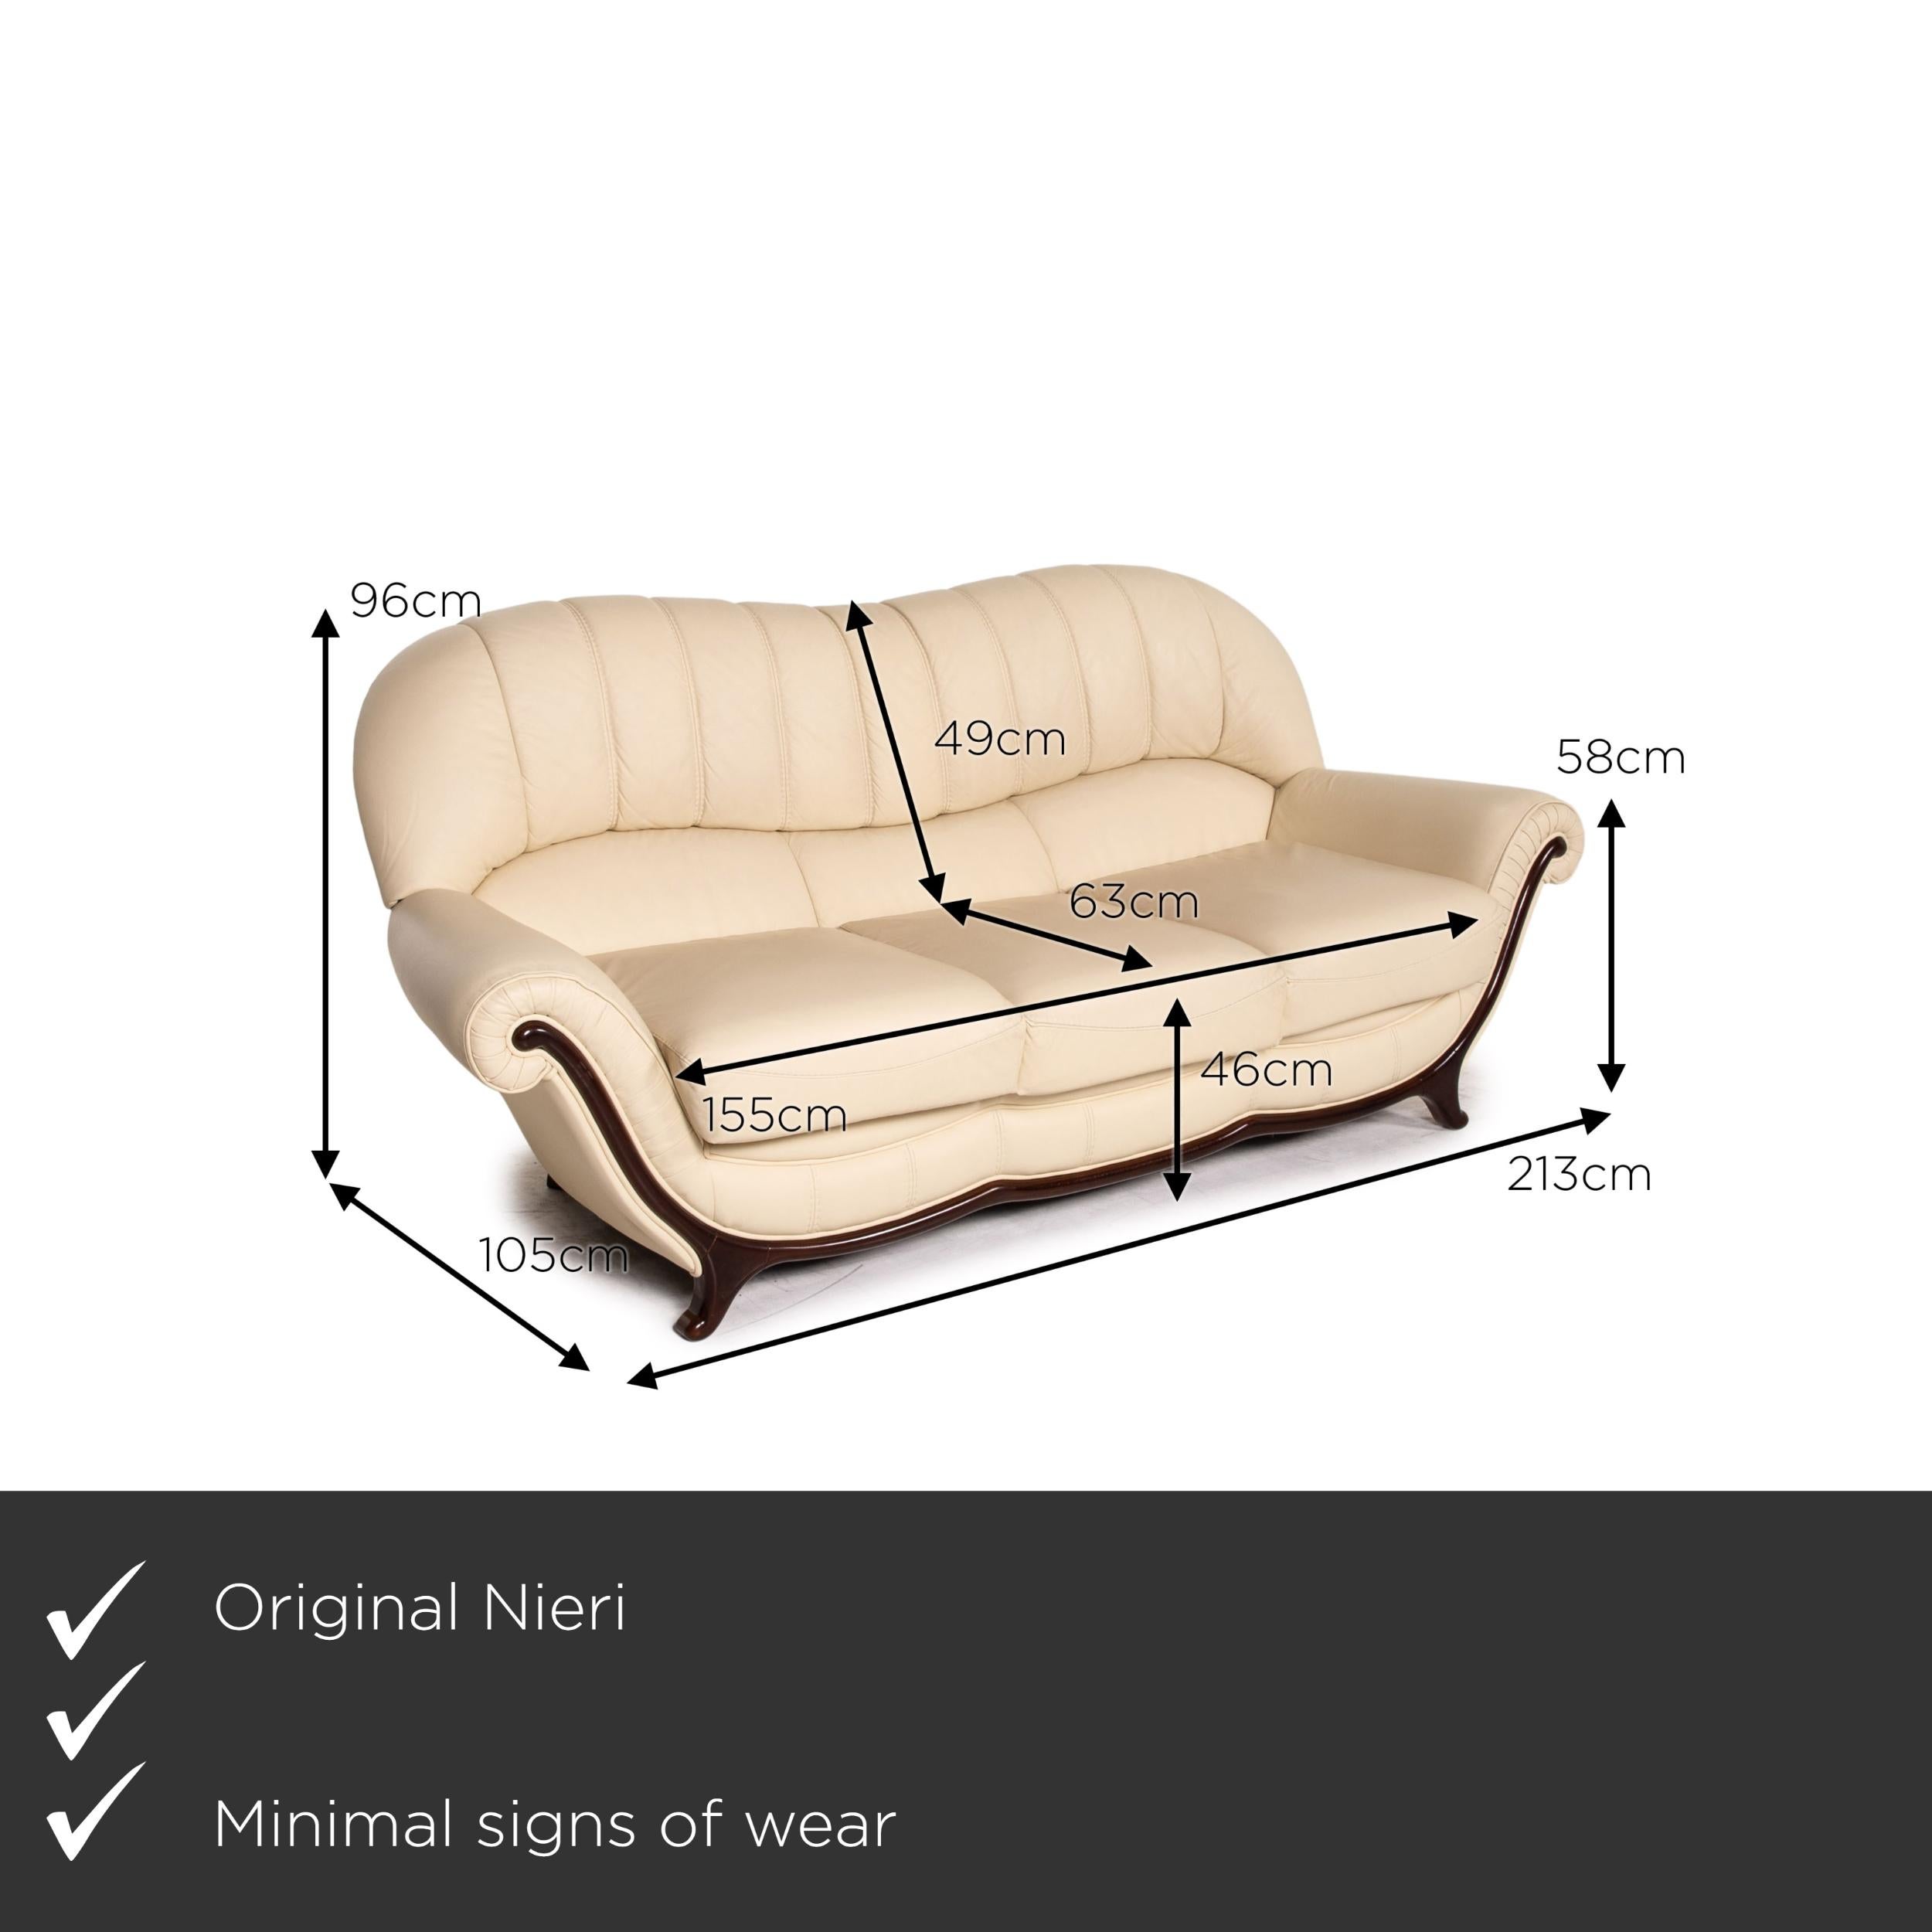 We present to you a Nieri leather wood sofa cream three-seater couch.


 Product measurements in centimeters:
 

Depth: 105
Width: 213
Height: 96
Seat height: 46
Rest height: 58
Seat depth: 63
Seat width: 155
Back height: 49.
 